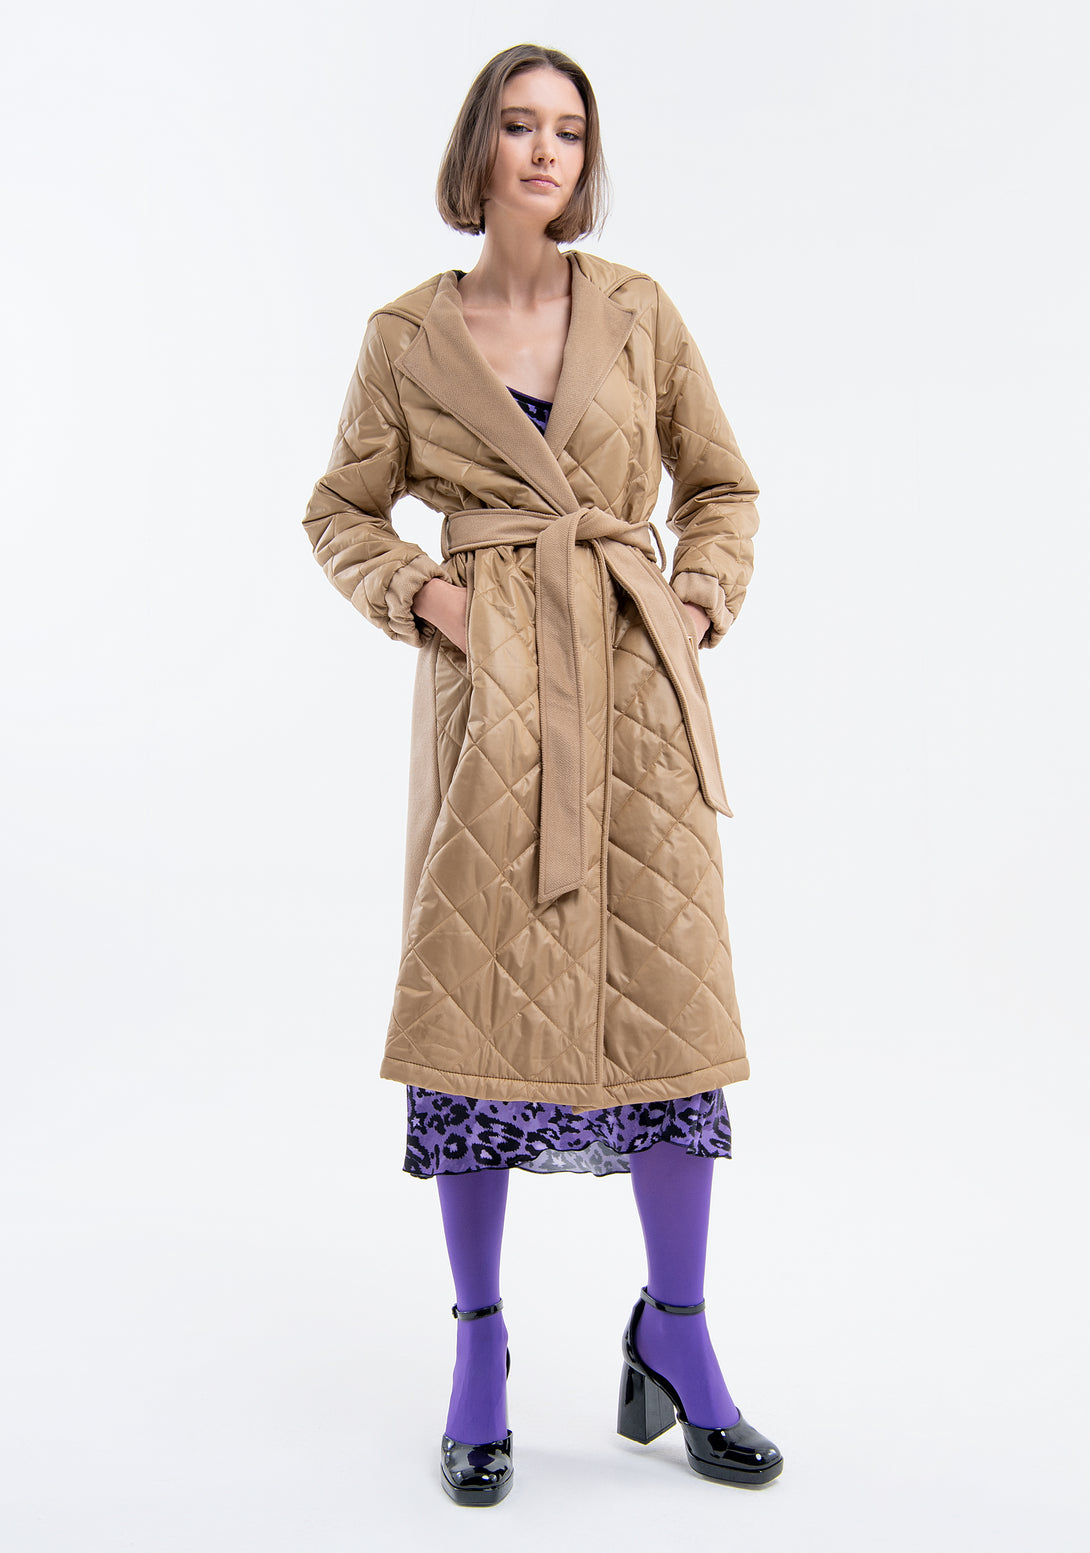 Long coat regular fit made in quilted nylon and textured fabric